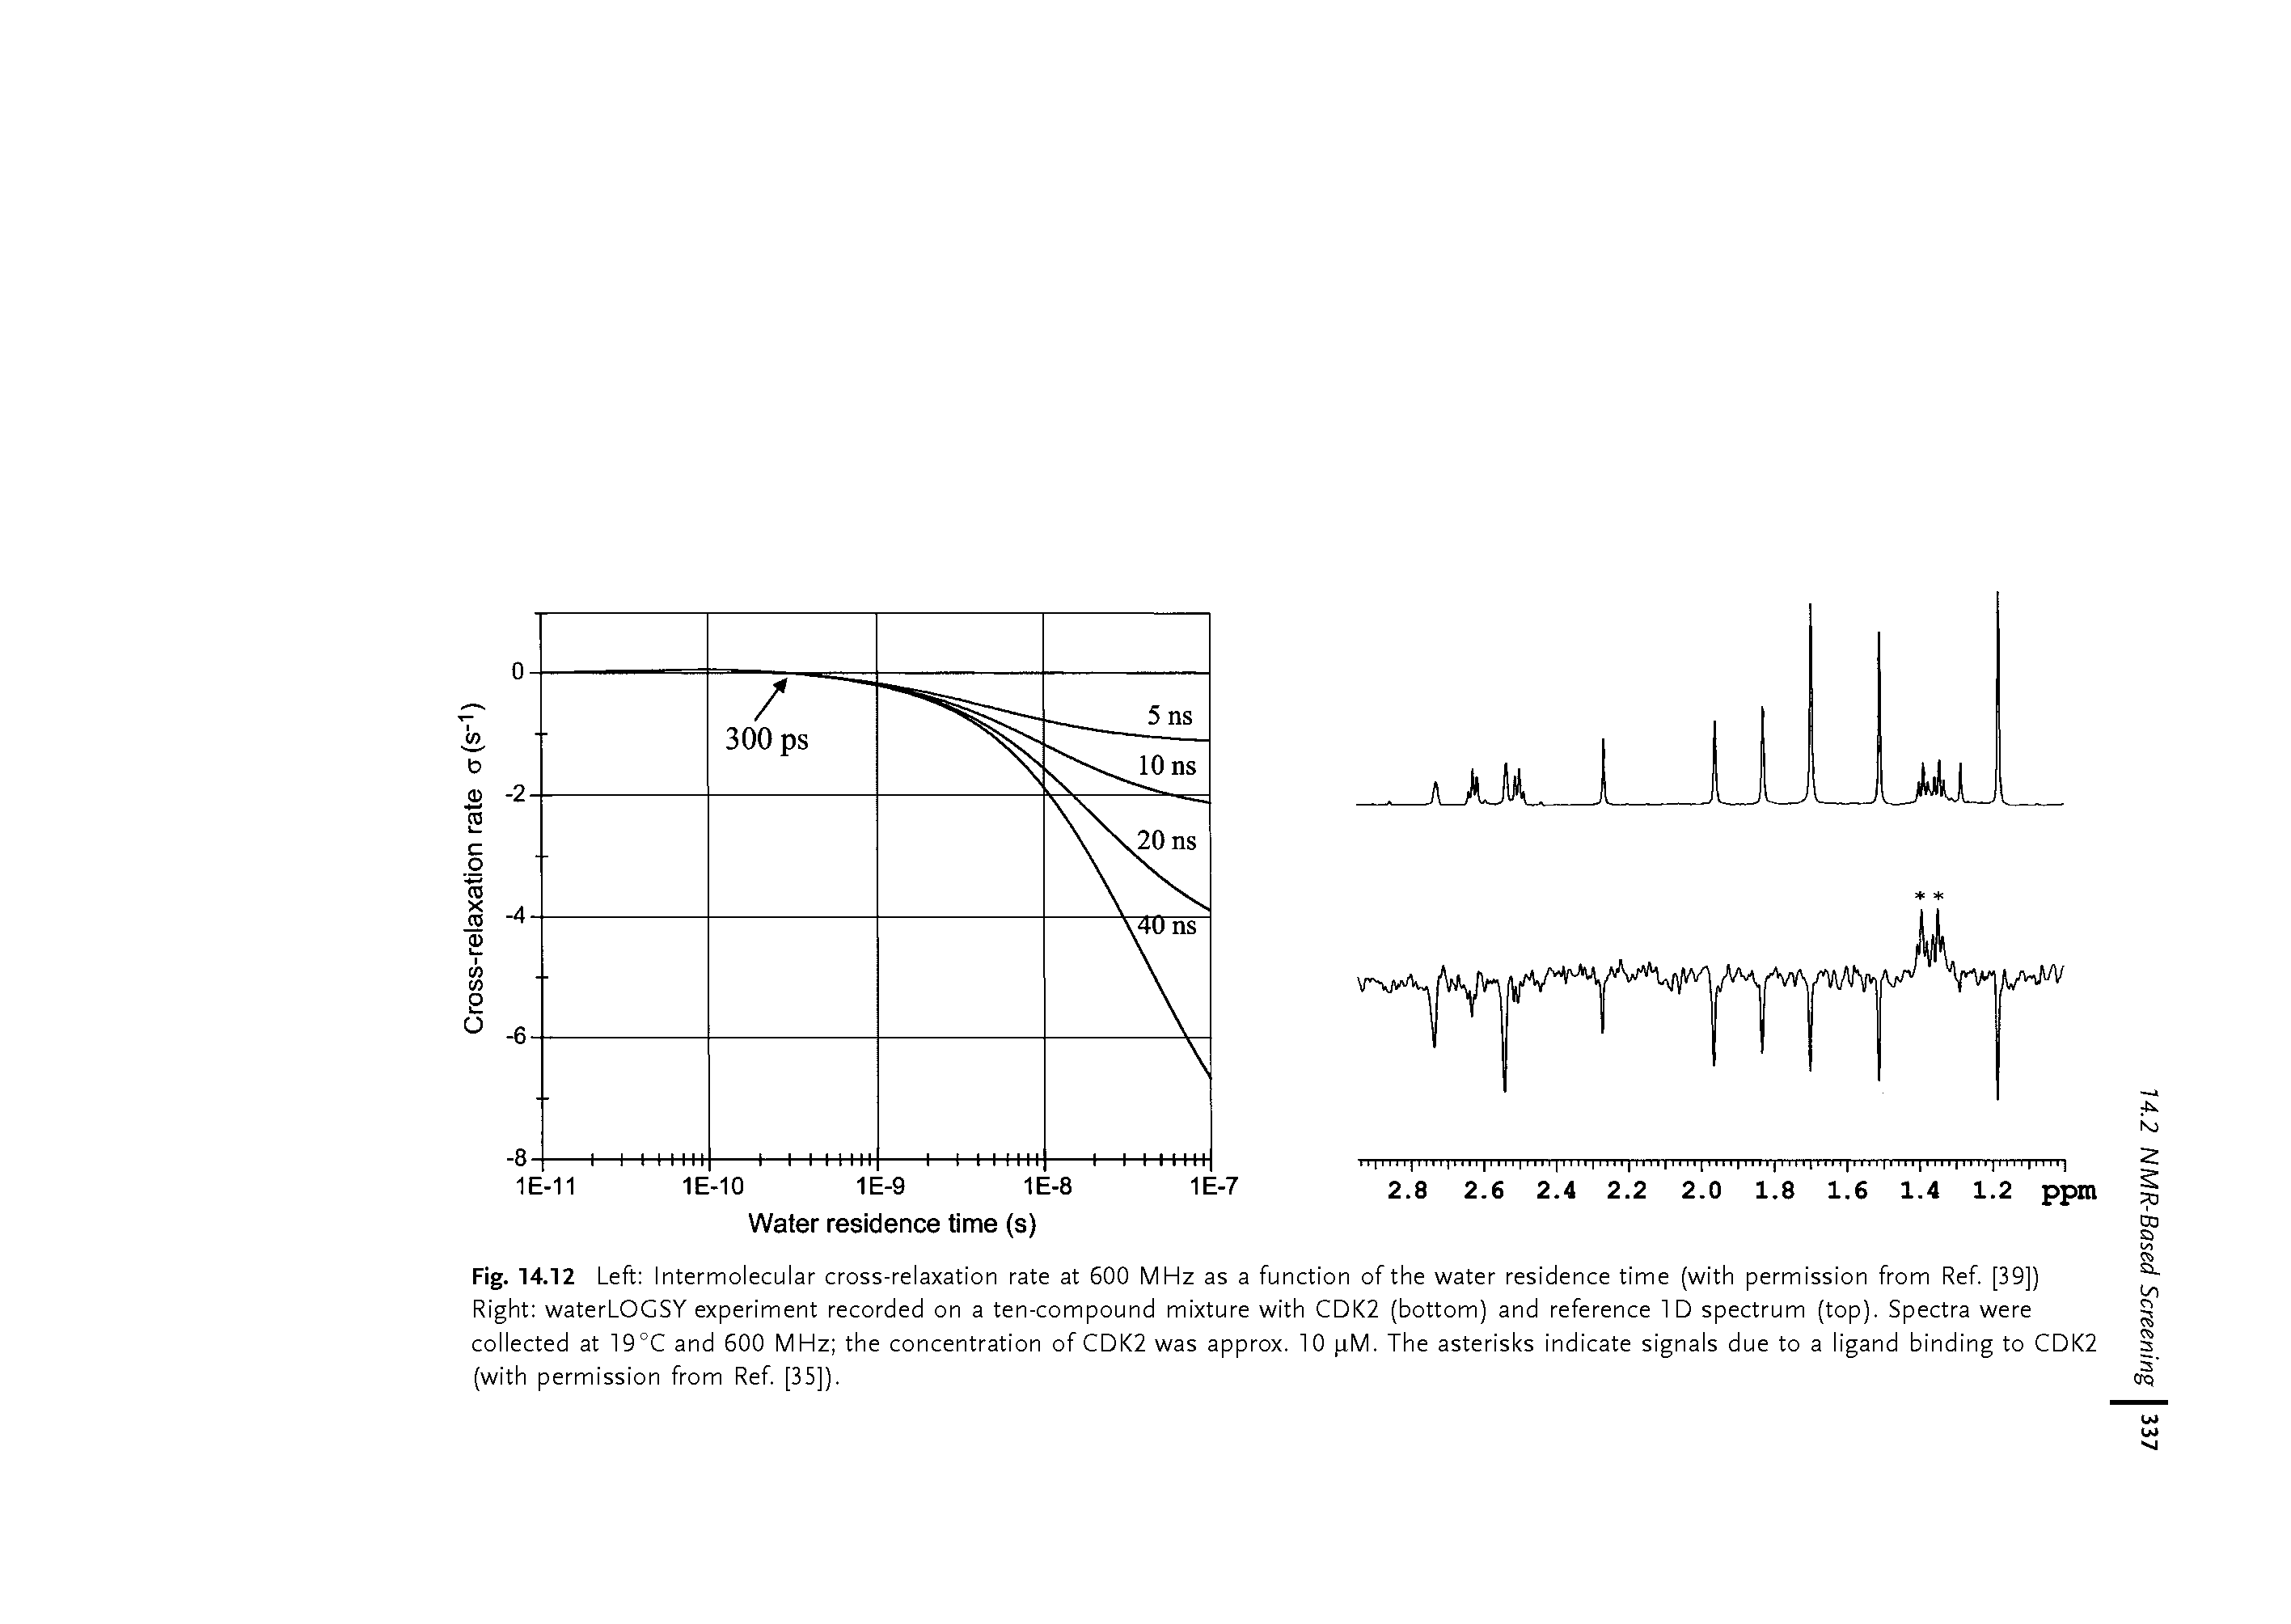 Fig. 14.12 Left Intermolecular cross-relaxation rate at 600 MHz as a function of the water residence time (with permission from Ref. [39]) Right waterLOGSY experiment recorded on a ten-compound mixture with CDK2 (bottom) and reference ID spectrum (top). Spectra were collected at 19°C and 600 MHz the concentration of CDK2 was approx. 10 jj,M. The asterisks indicate signals due to a ligand binding to CDK2 (with permission from Ref. [35]).